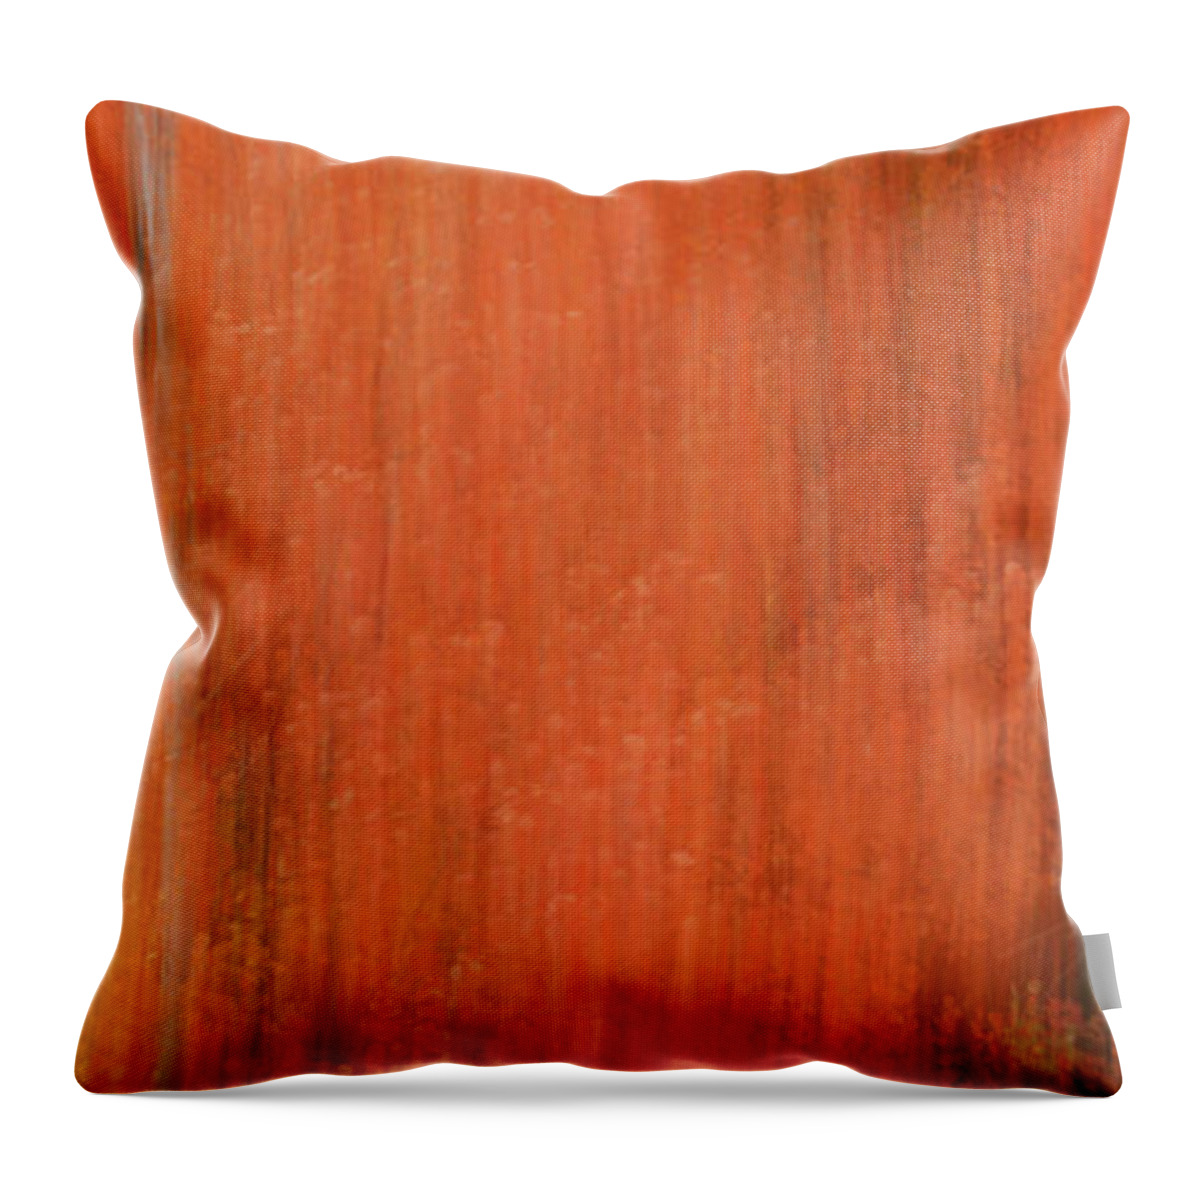 Flash Throw Pillow featuring the photograph Forest Illusions- Flash of Red by Whispering Peaks Photography